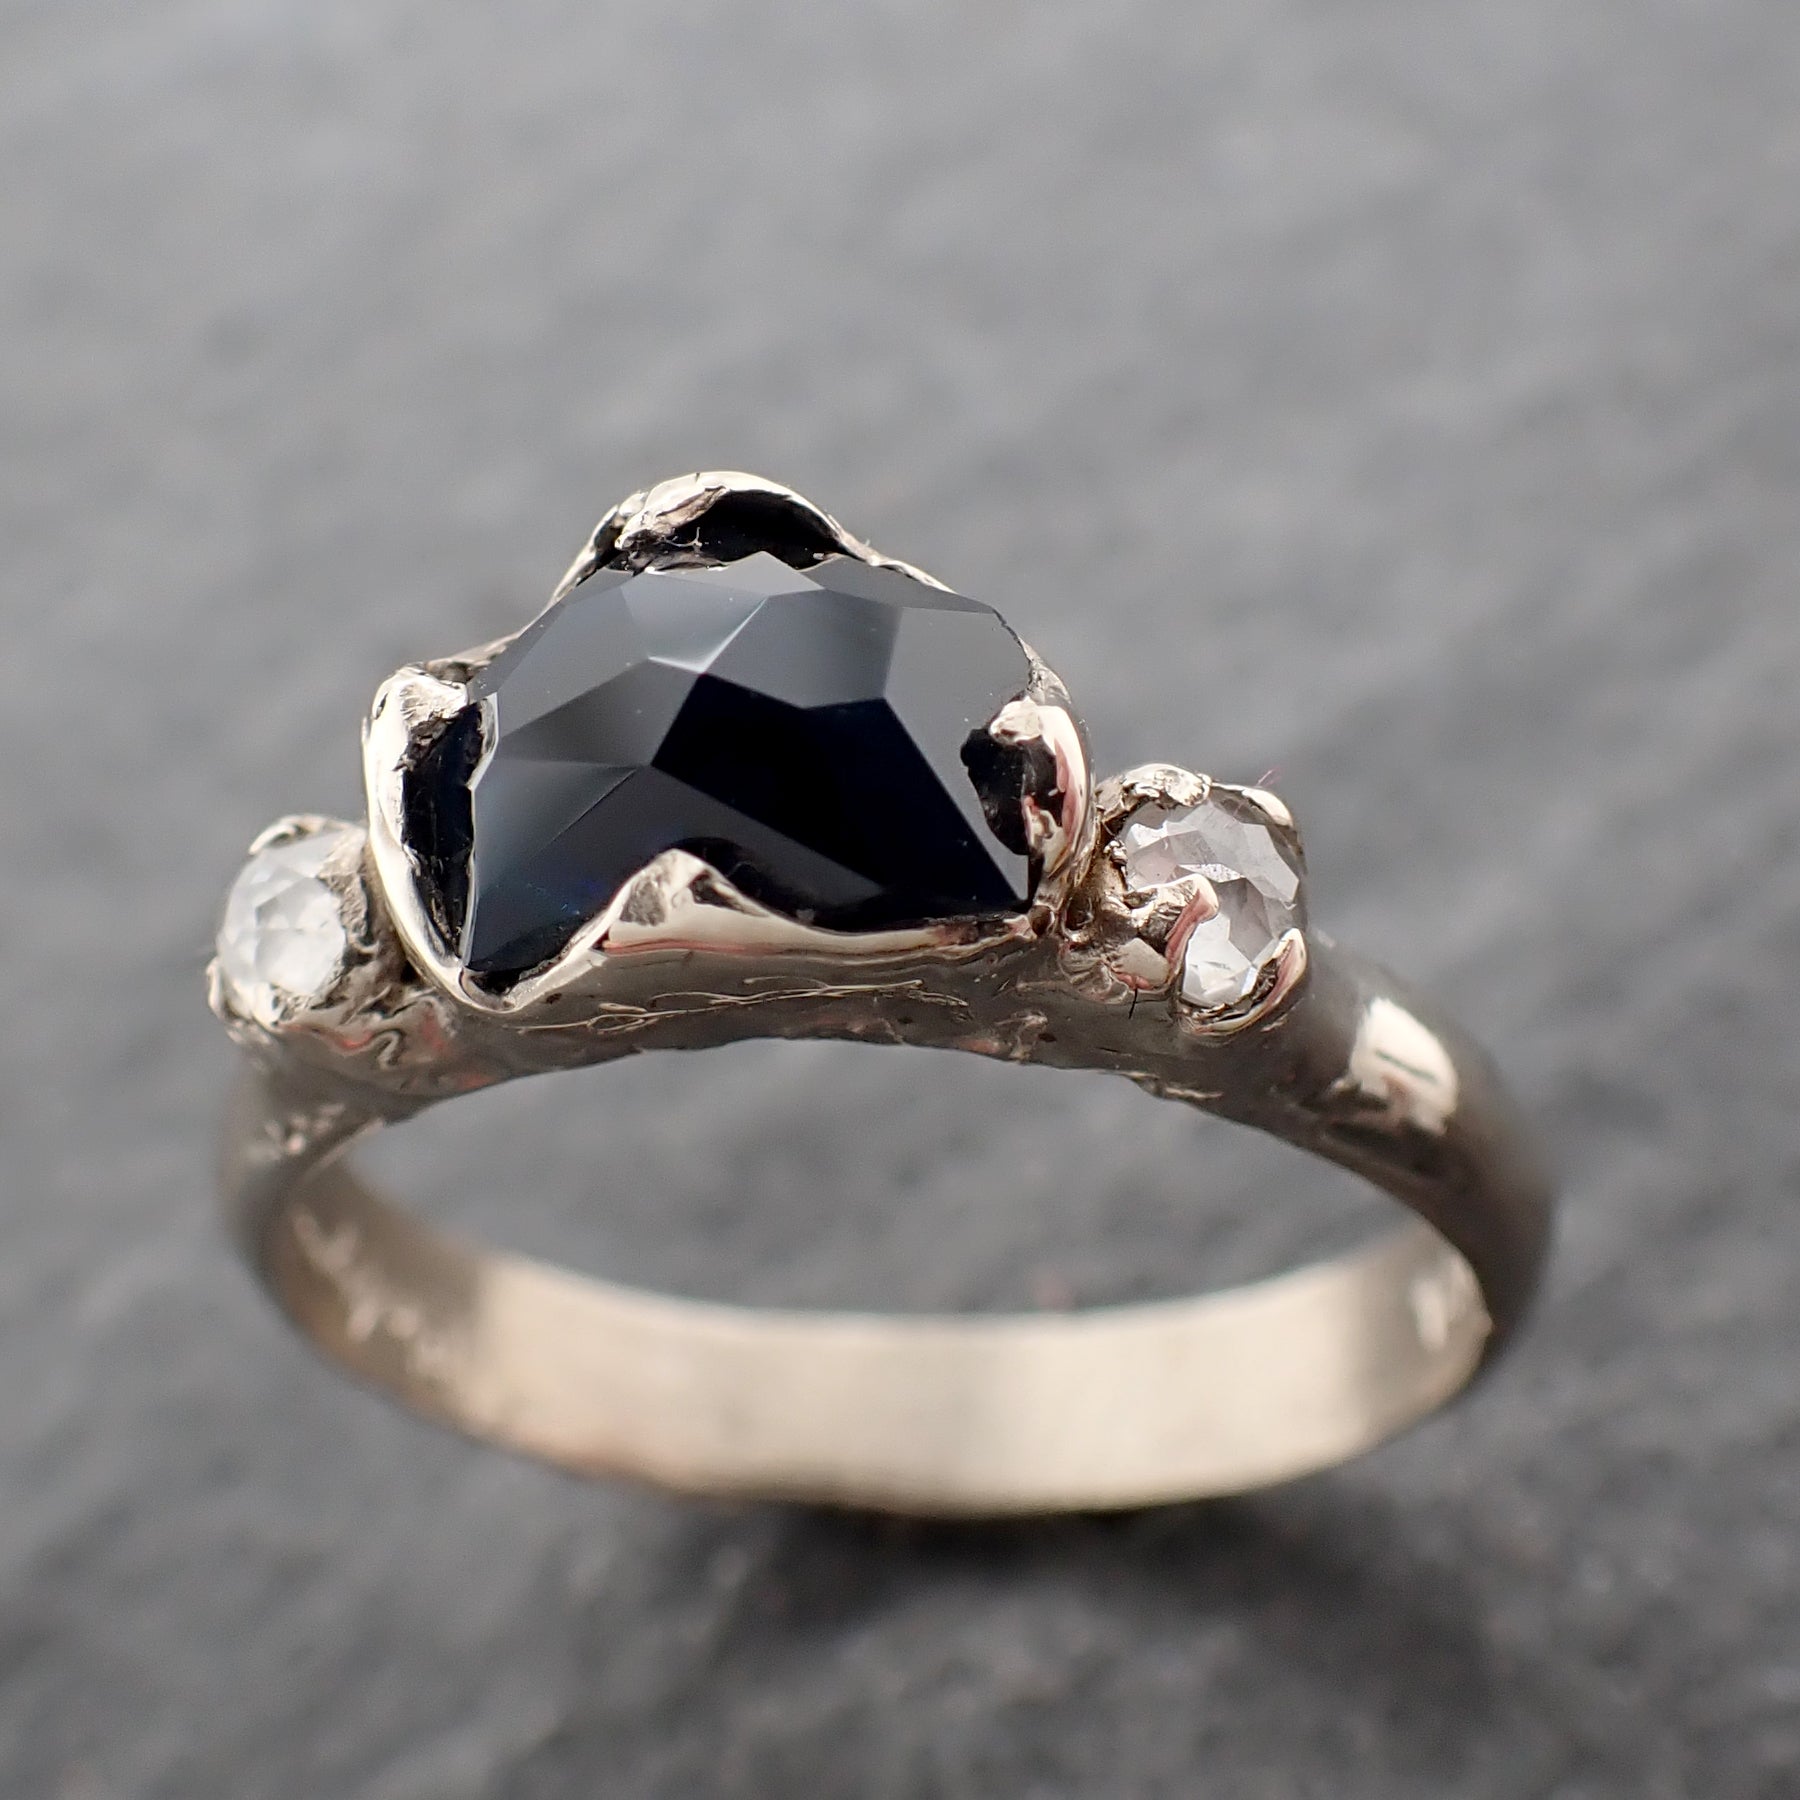 Partially faceted Sapphire and fancy cut Diamond 14k White Gold Engagement Ring Wedding Ring Custom One Of a Kind blue Gemstone Ring 2483